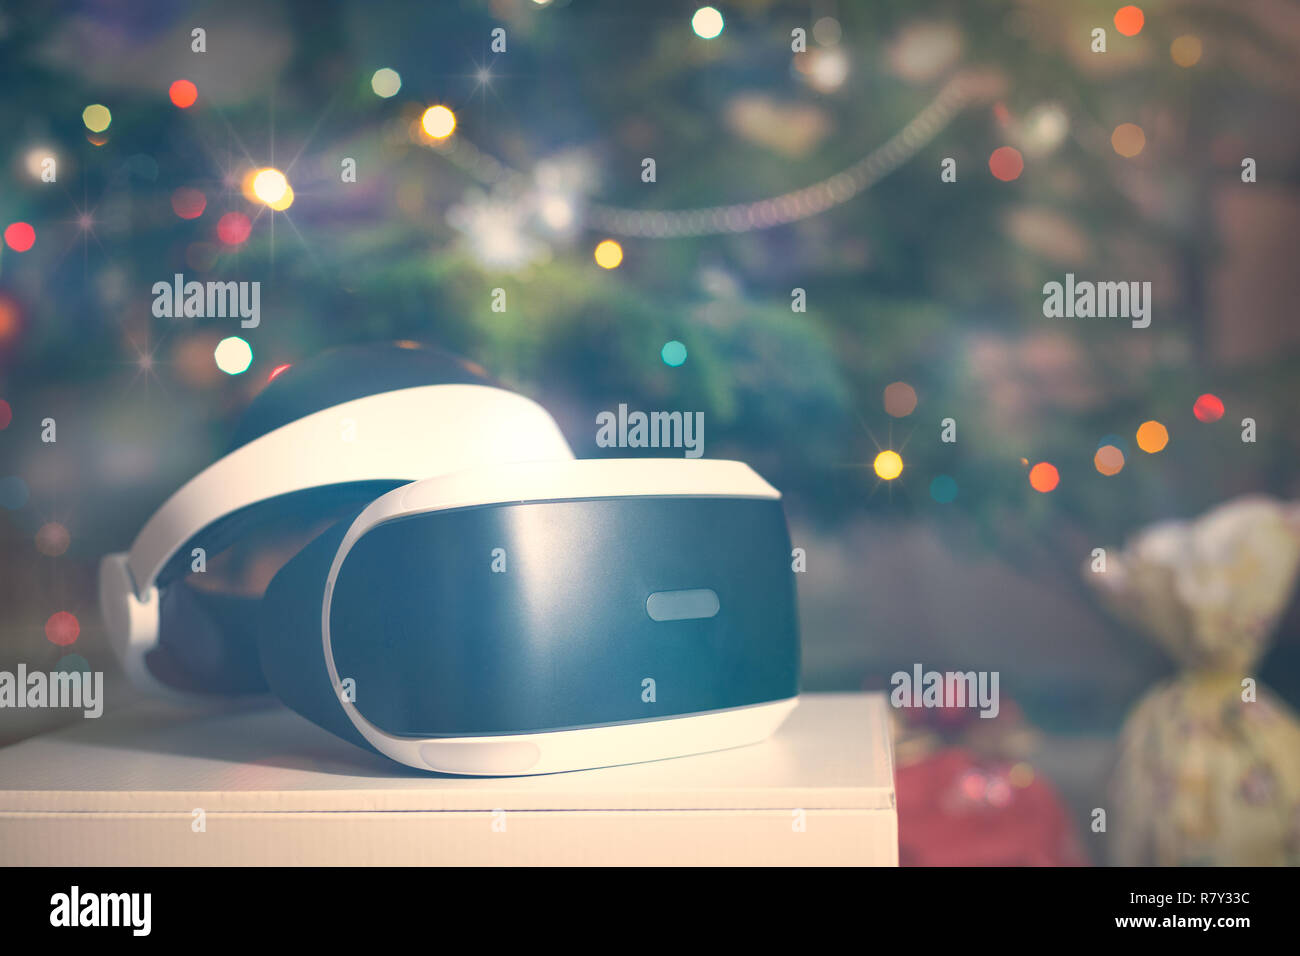 VR headset as gift under the christmas tree with defocused lights Stock Photo